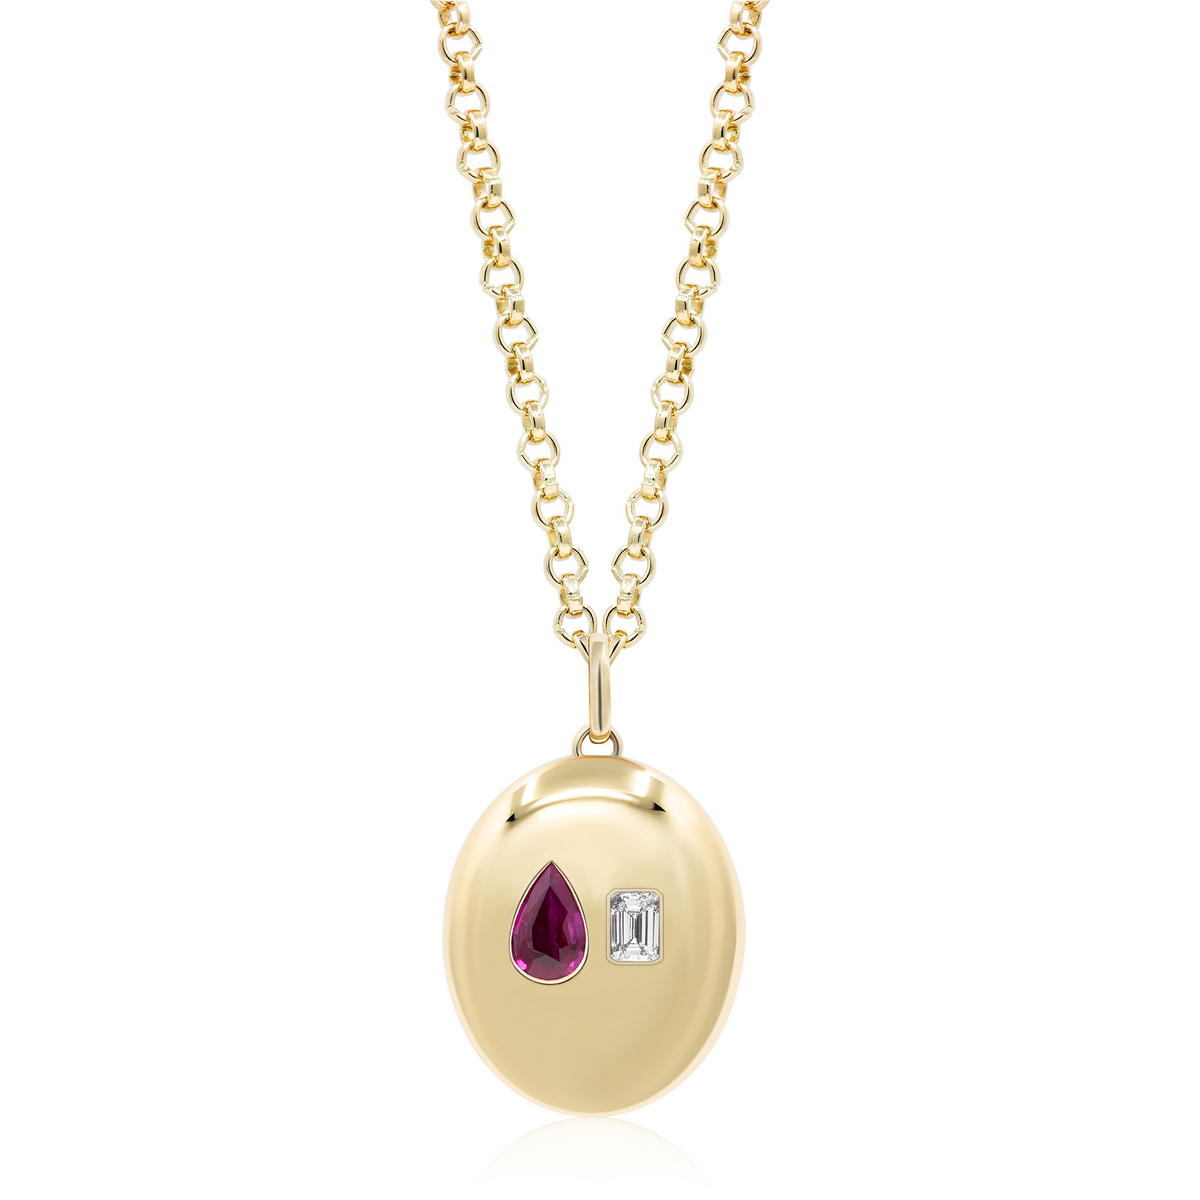 Burnished Pear Shape Ruby and Emerald Cut Diamond Charm Pendant in Yellow Gold